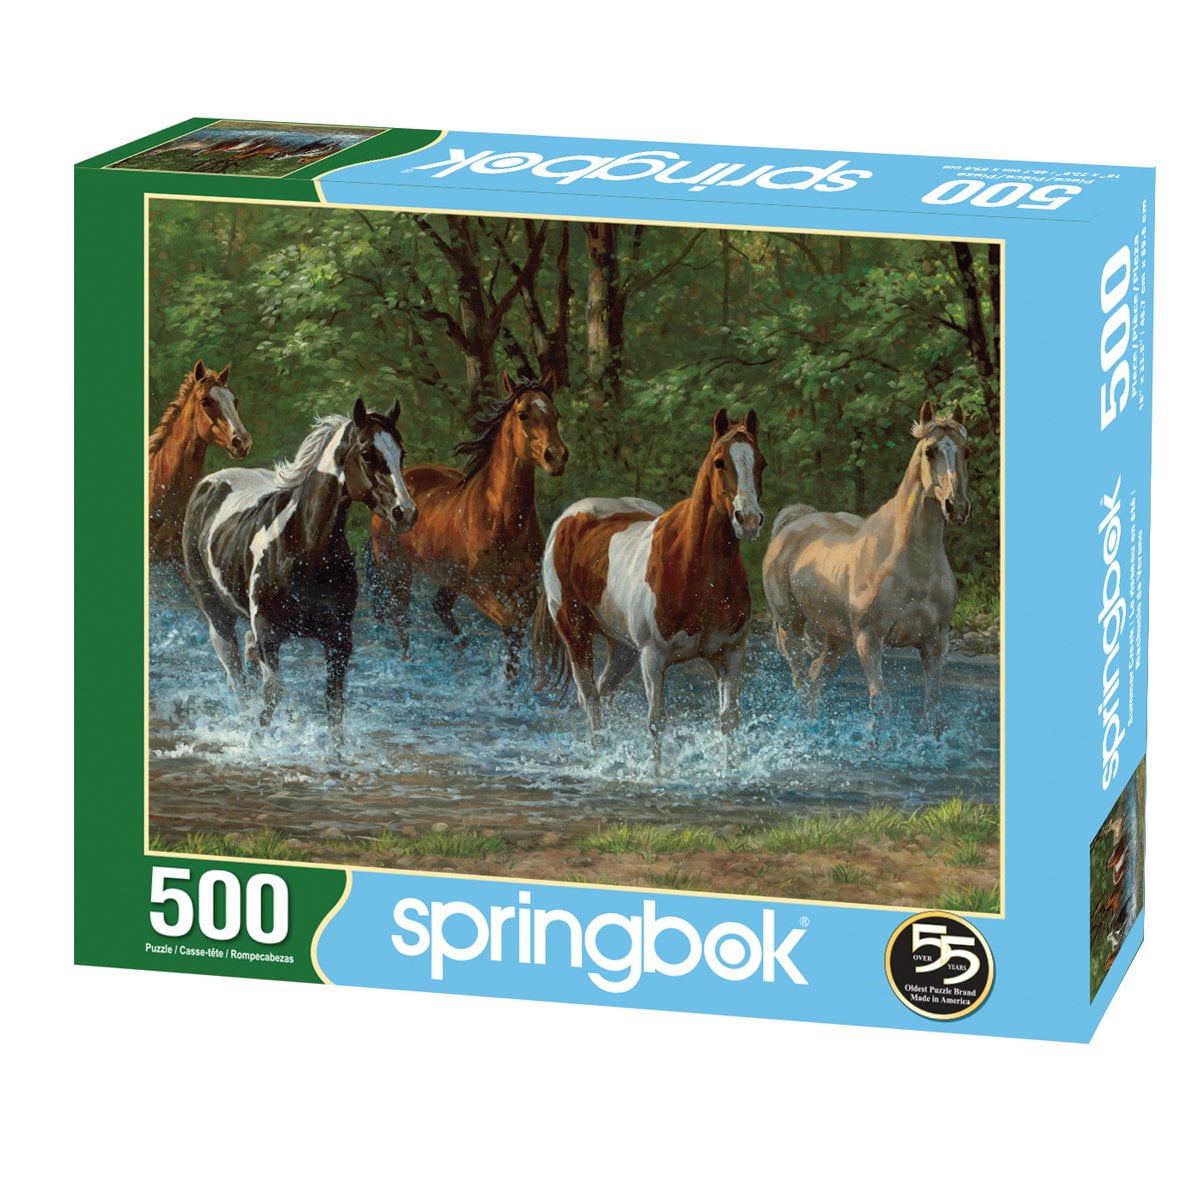 Springbok Puzzles Unique Cut Interlocking Pieces 33-01478 Made in USA Large 18 Inches by 23.5 Inches Puzzle 500 Piece Jigsaw Puzzle Iron Horse